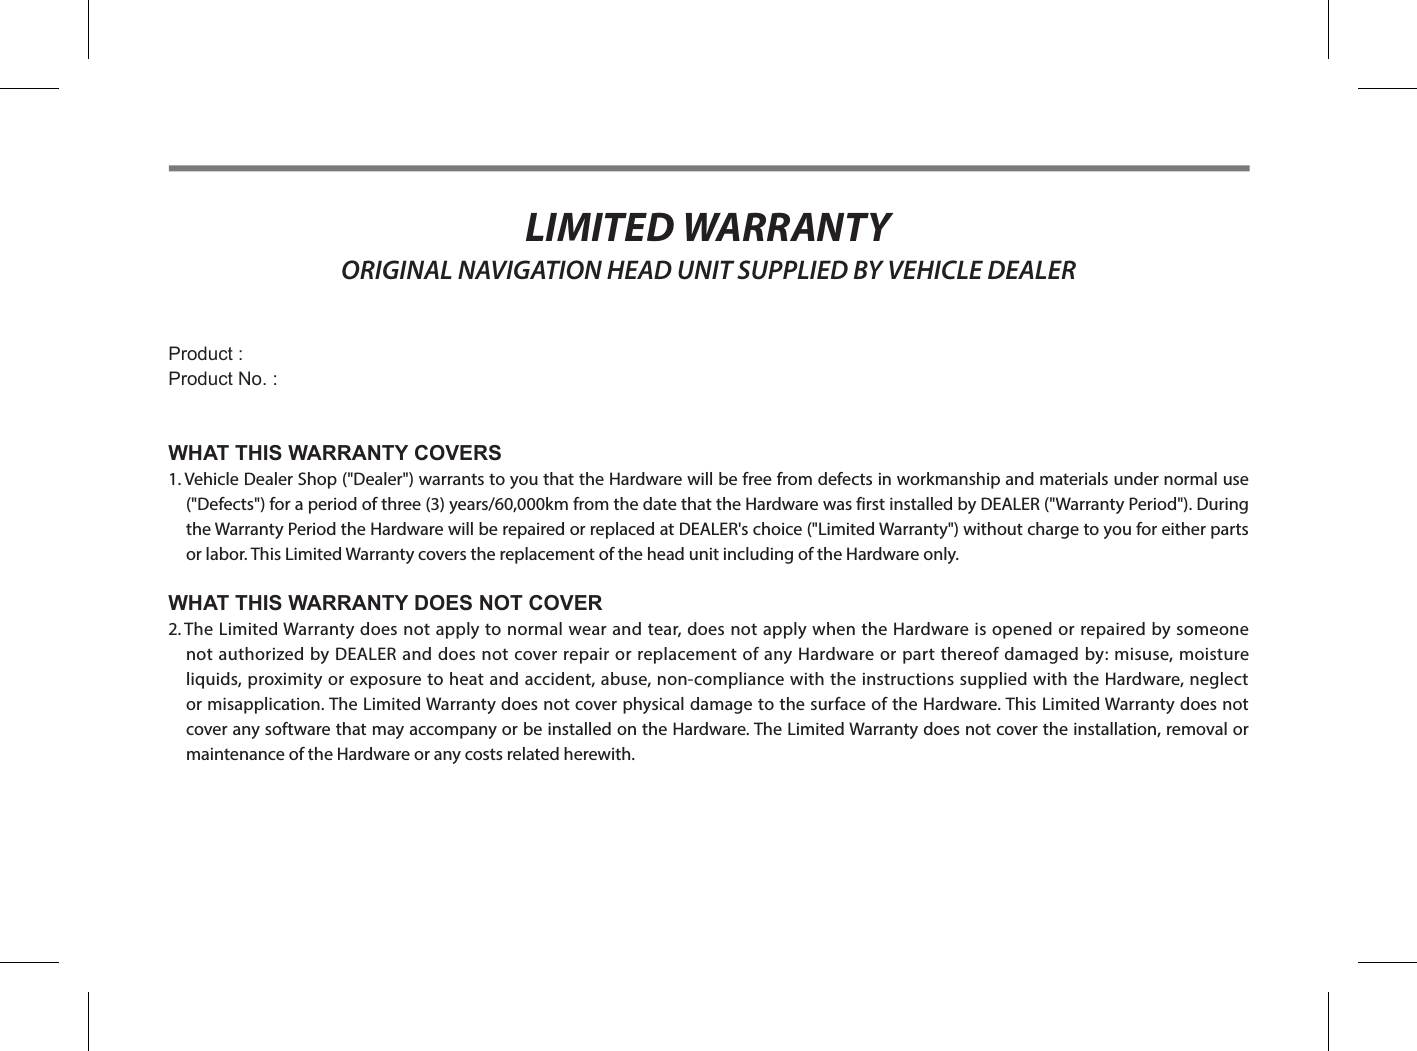 LIMITED WARRANTY ORIGINAL NAVIGATION HEAD UNIT SUPPLIED BY VEHICLE DEALERProduct : Product No. :WHAT THIS WARRANTY COVERS1.  Vehicle Dealer Shop (&quot;Dealer&quot;) warrants to you that the Hardware will be free from defects in workmanship and materials under normal use (&quot;Defects&quot;) for a period of three (3) years/60,000km from the date that the Hardware was first installed by DEALER (&quot;Warranty Period&quot;). During the Warranty Period the Hardware will be repaired or replaced at DEALER&apos;s choice (&quot;Limited Warranty&quot;) without charge to you for either parts or labor. This Limited Warranty covers the replacement of the head unit including of the Hardware only.WHAT THIS WARRANTY DOES NOT COVER2.   The Limited Warranty does not apply to normal wear and tear, does not apply when the Hardware is opened or repaired by someone not authorized by DEALER and does not cover repair or replacement of any Hardware or part thereof damaged by: misuse, moisture liquids, proximity or exposure to heat and accident, abuse, non-compliance with the instructions supplied with the Hardware, neglect or misapplication. The Limited Warranty does not cover physical damage to the surface of the Hardware. This Limited Warranty does not cover any software that may accompany or be installed on the Hardware. The Limited Warranty does not cover the installation, removal or maintenance of the Hardware or any costs related herewith.